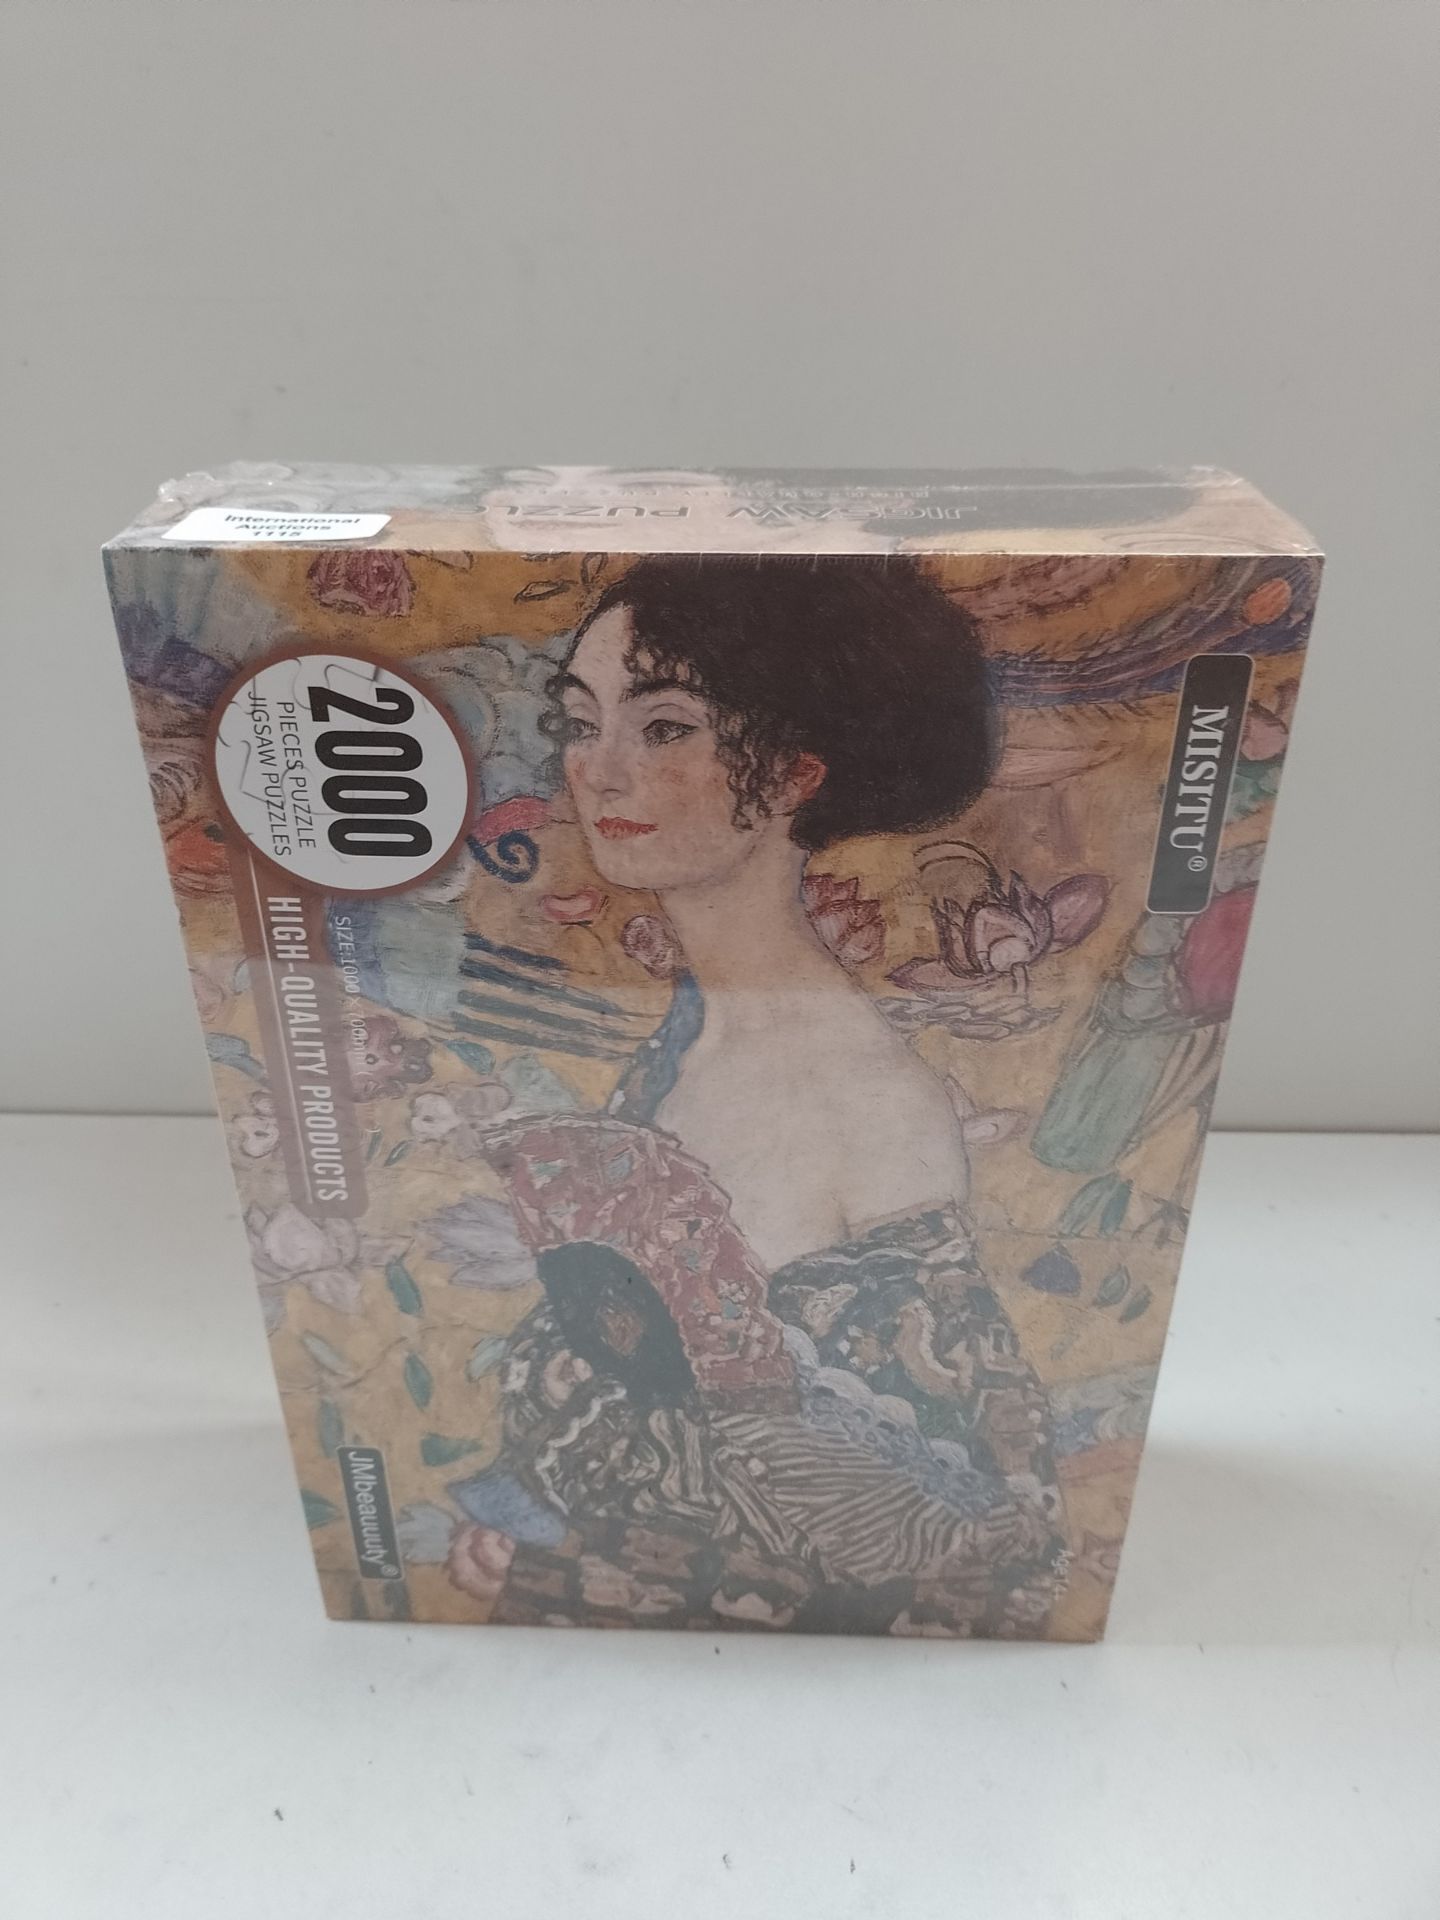 RRP £31.95 BRAND NEW STOCK JMbeauuuty 2000 Piece Jigsaw Puzzles for Adults - Image 2 of 2